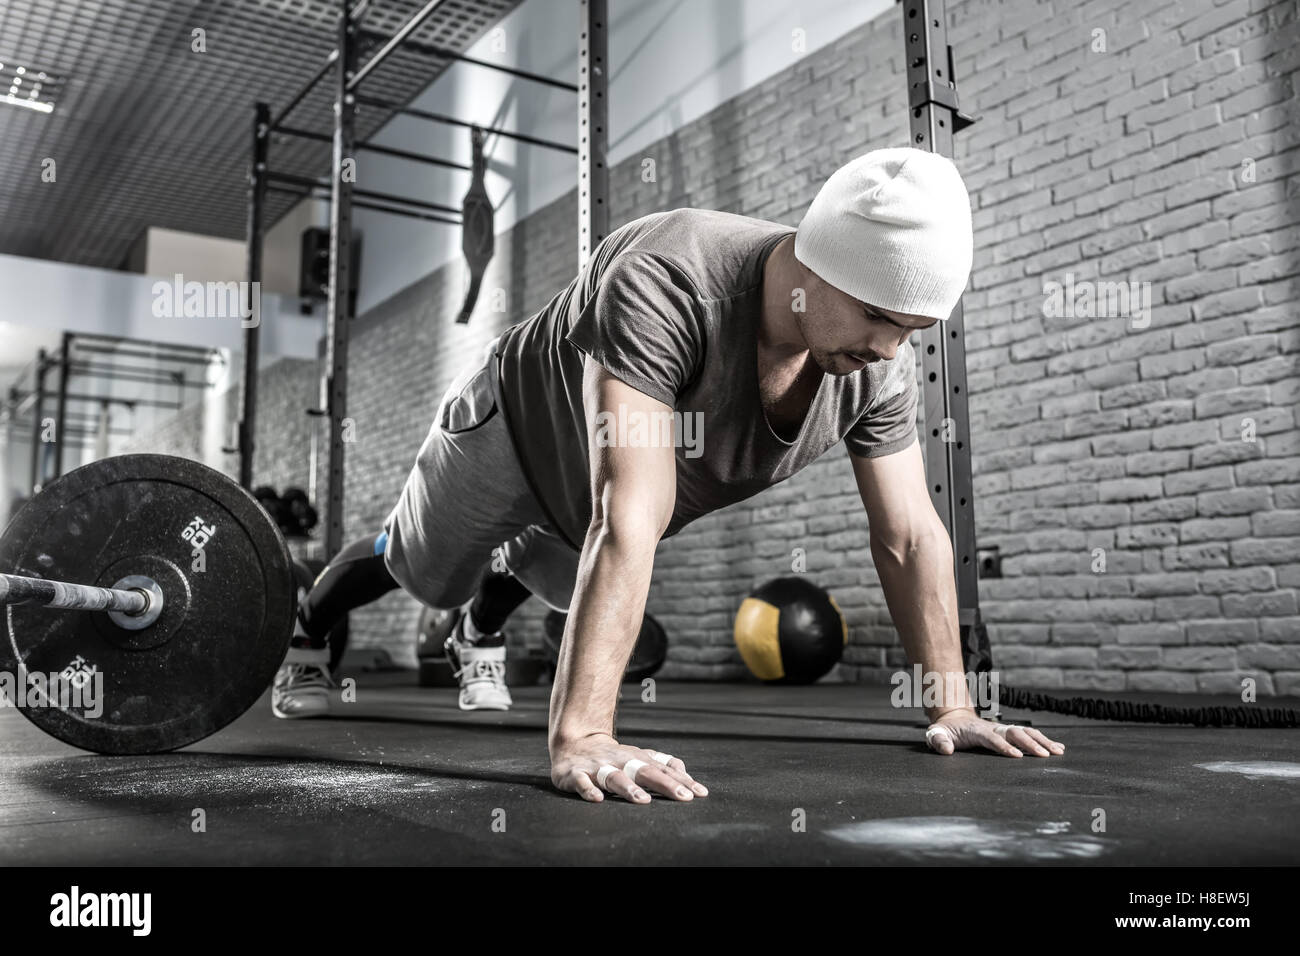 Pushup workout in gym Stock Photo